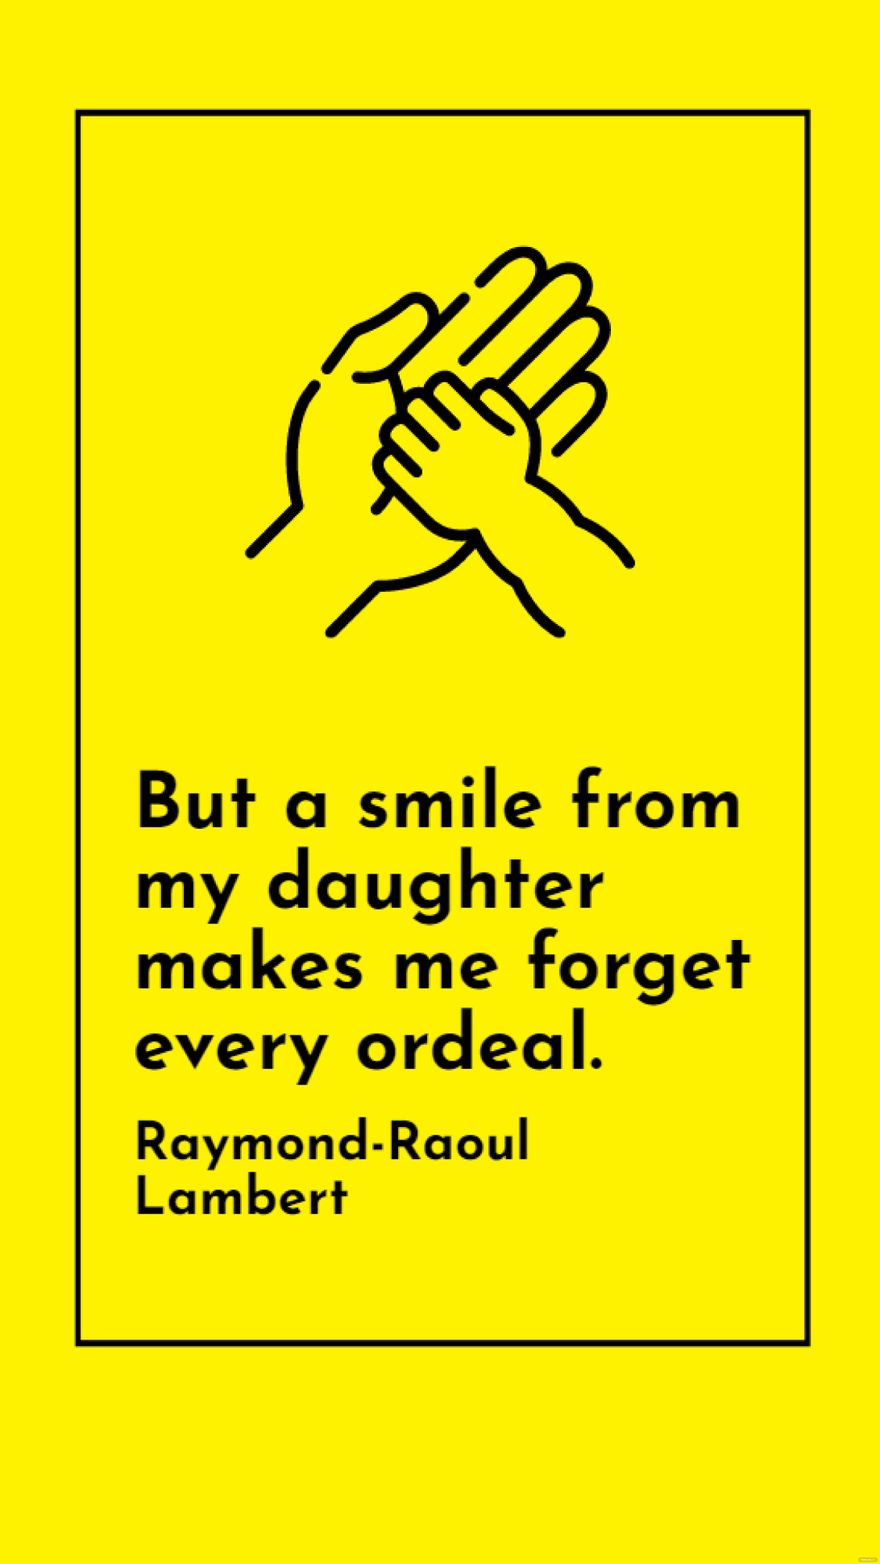 Free Raymond-Raoul Lambert - But a smile from my daughter makes me forget every ordeal. in JPG